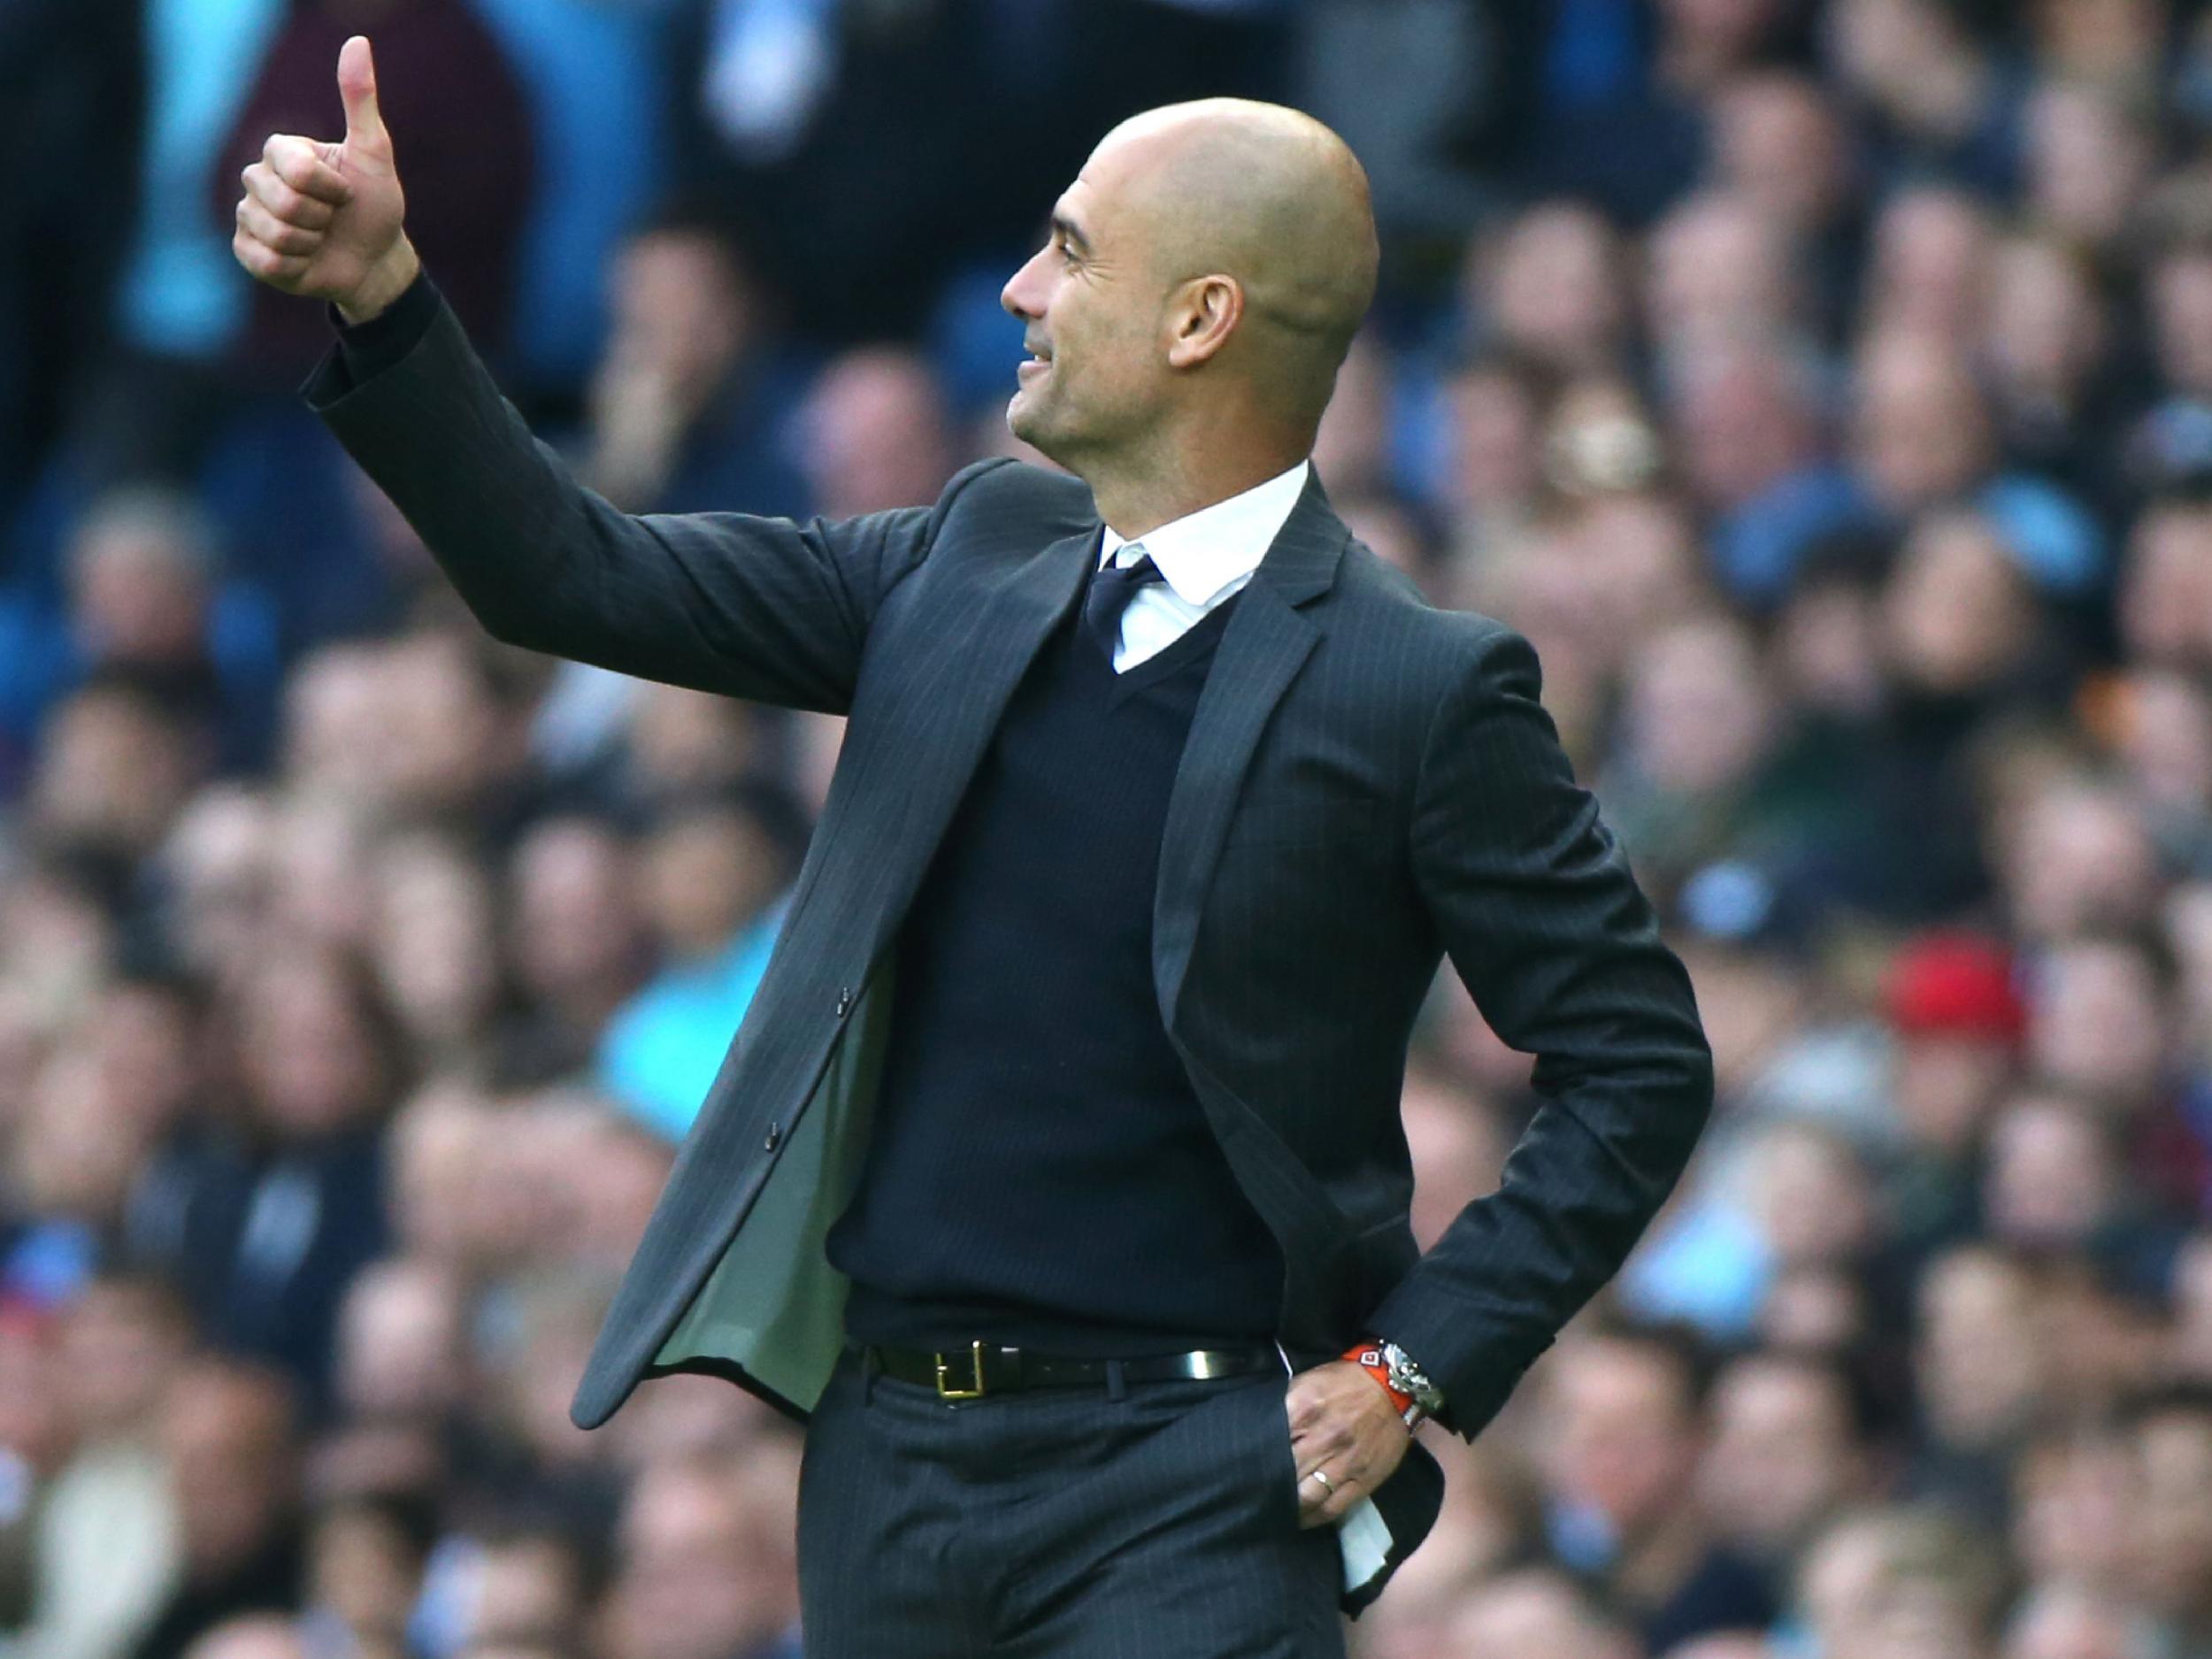 City hope Guardiola will be the man to finally deliver the Champions League